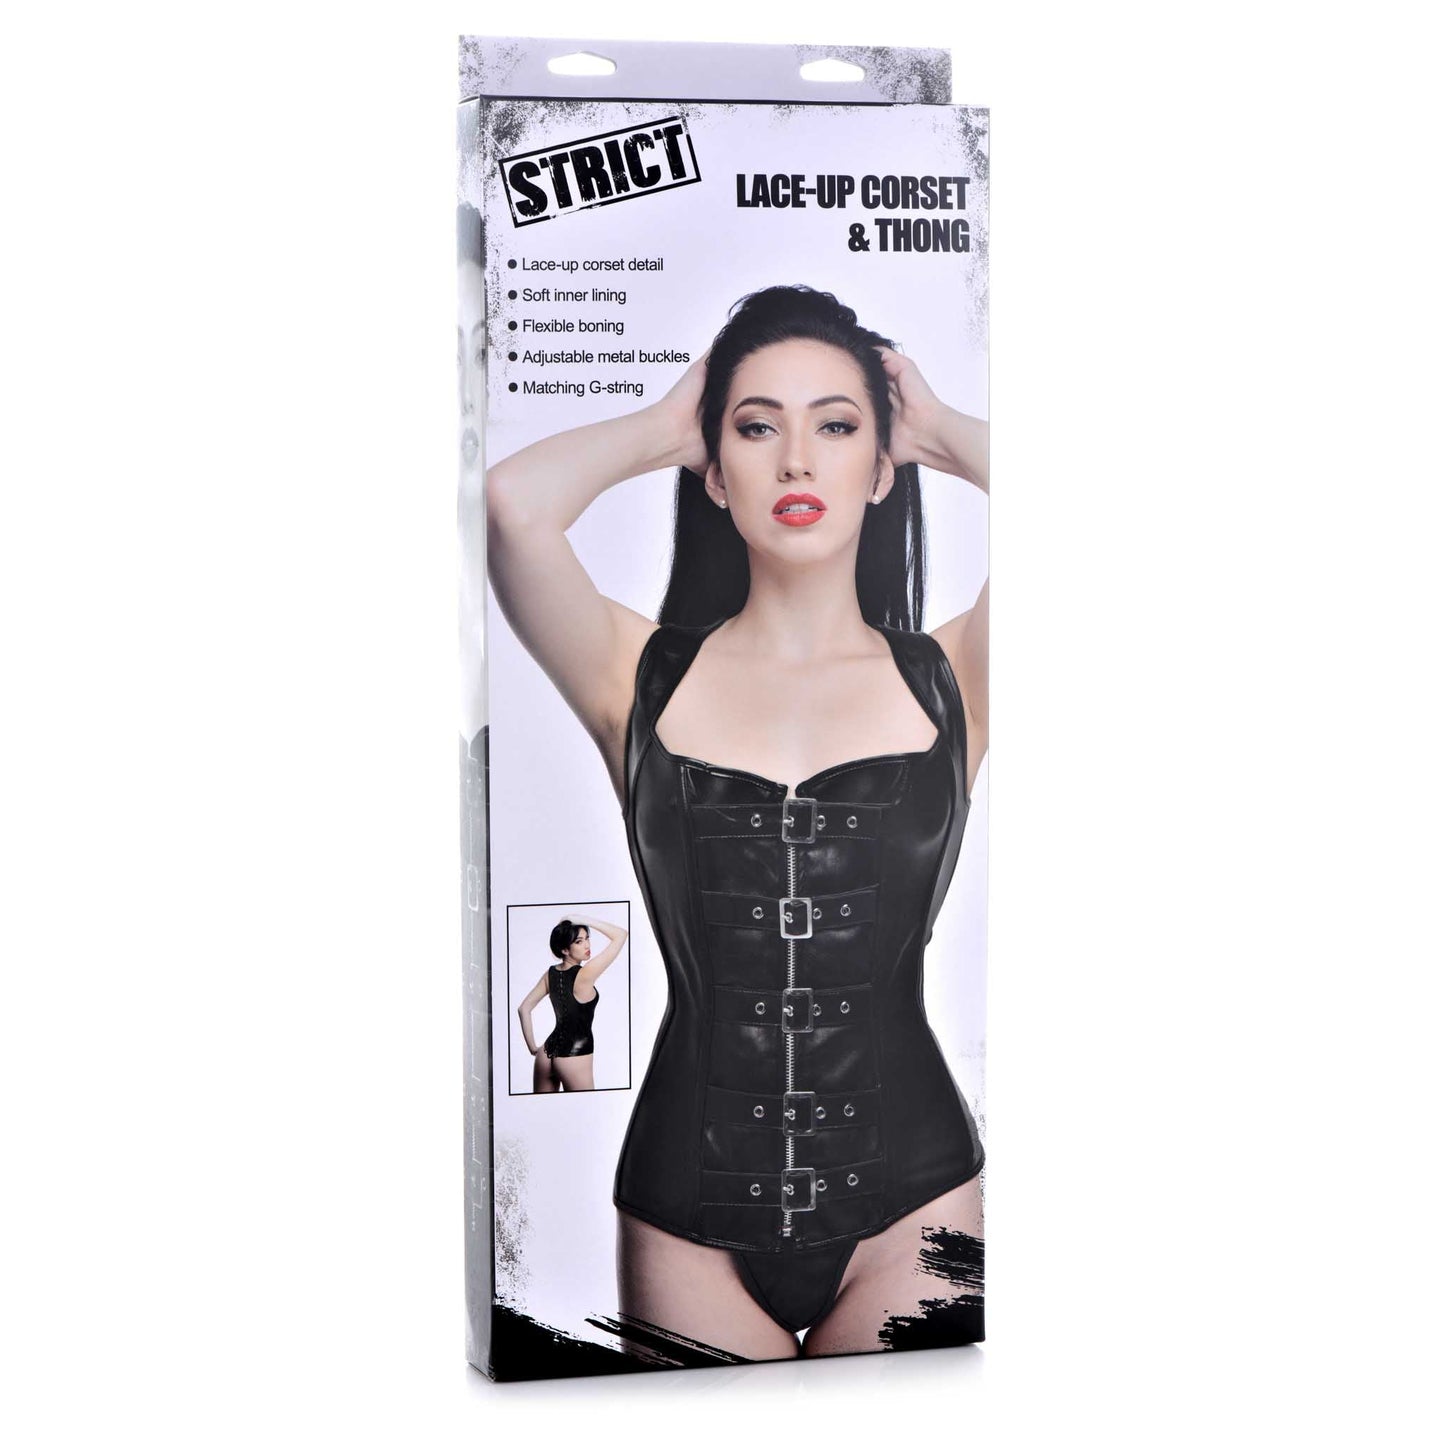 Strict Lace-Up Corset Vest and Thong - Xtra Large - Black